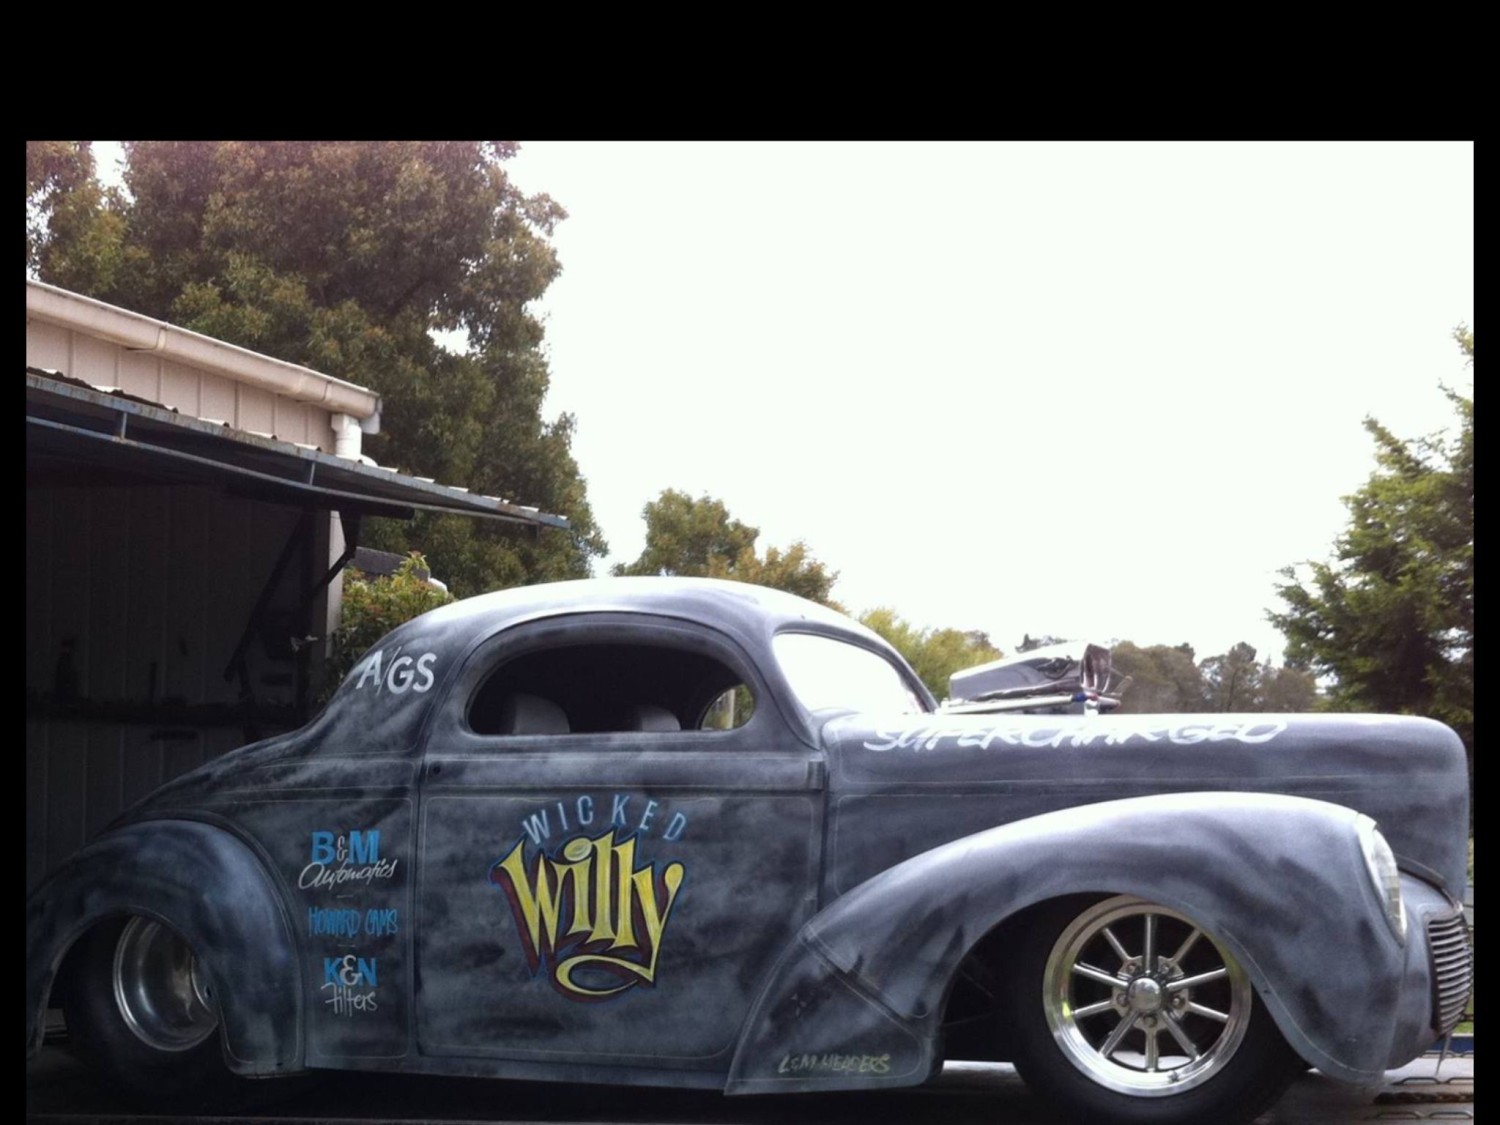 1940 Willys Willys